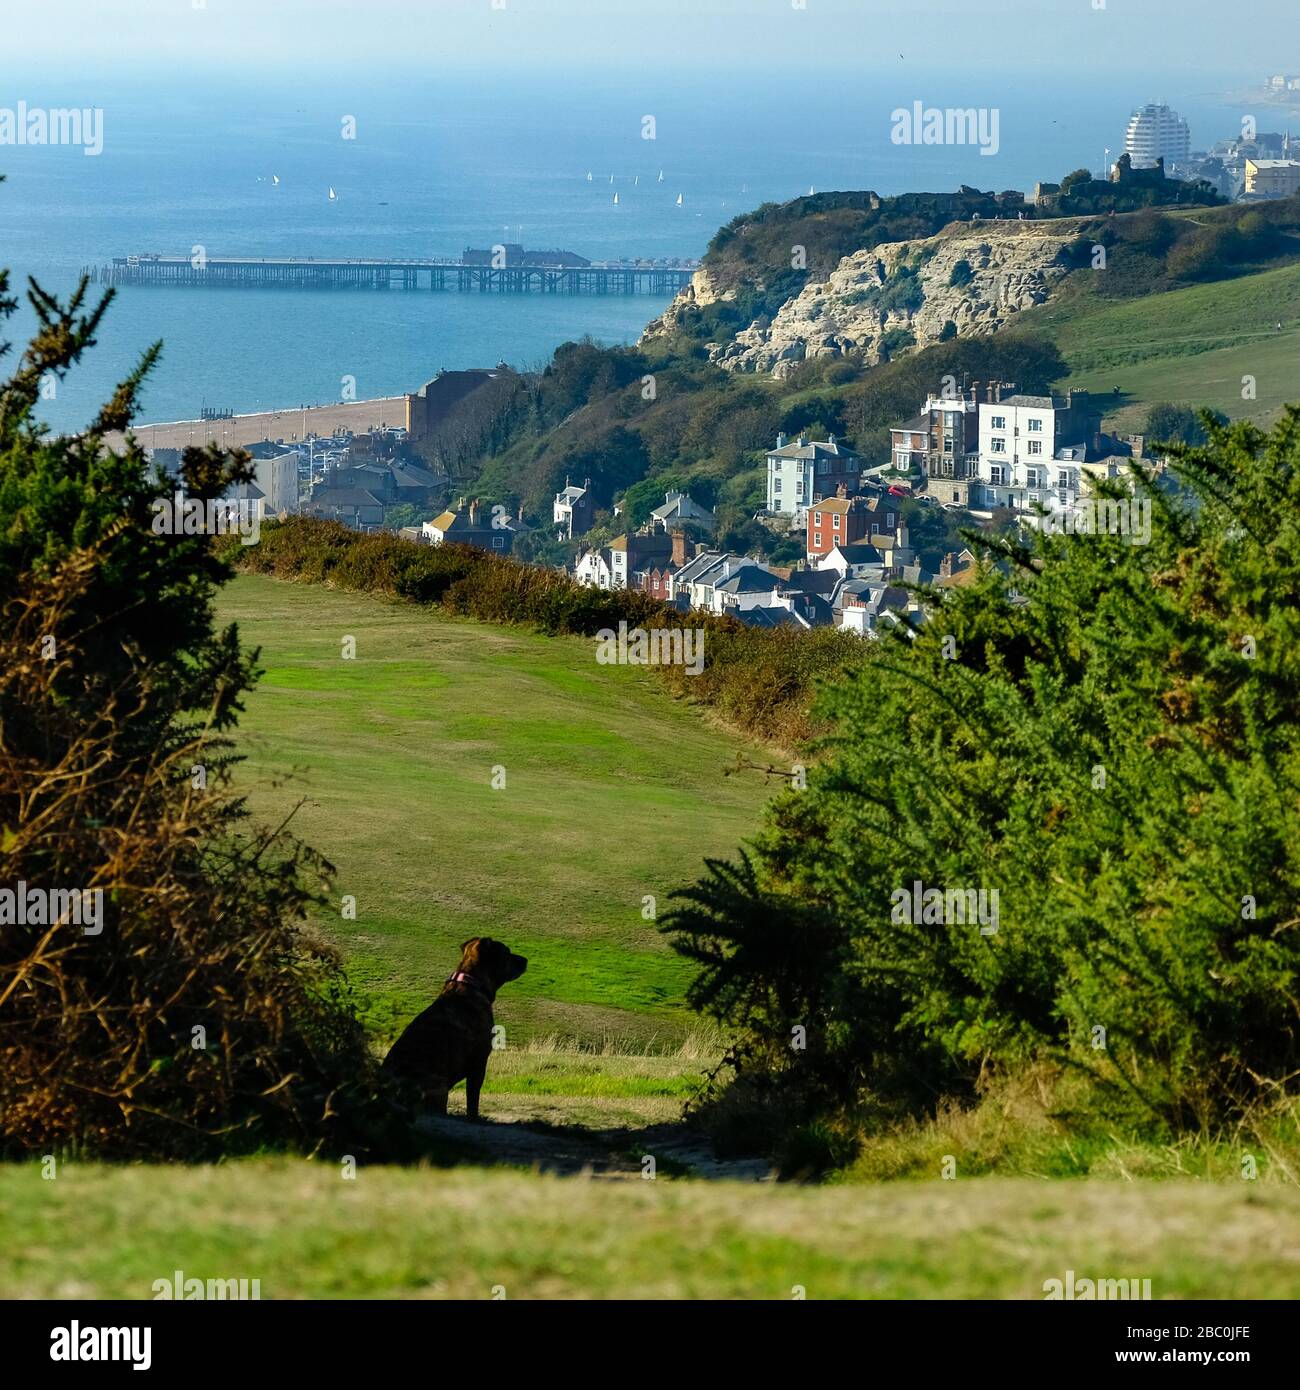 View over the town of Hastings, UK, from the exit of the funicular railway at East Cliff Hill Stock Photo